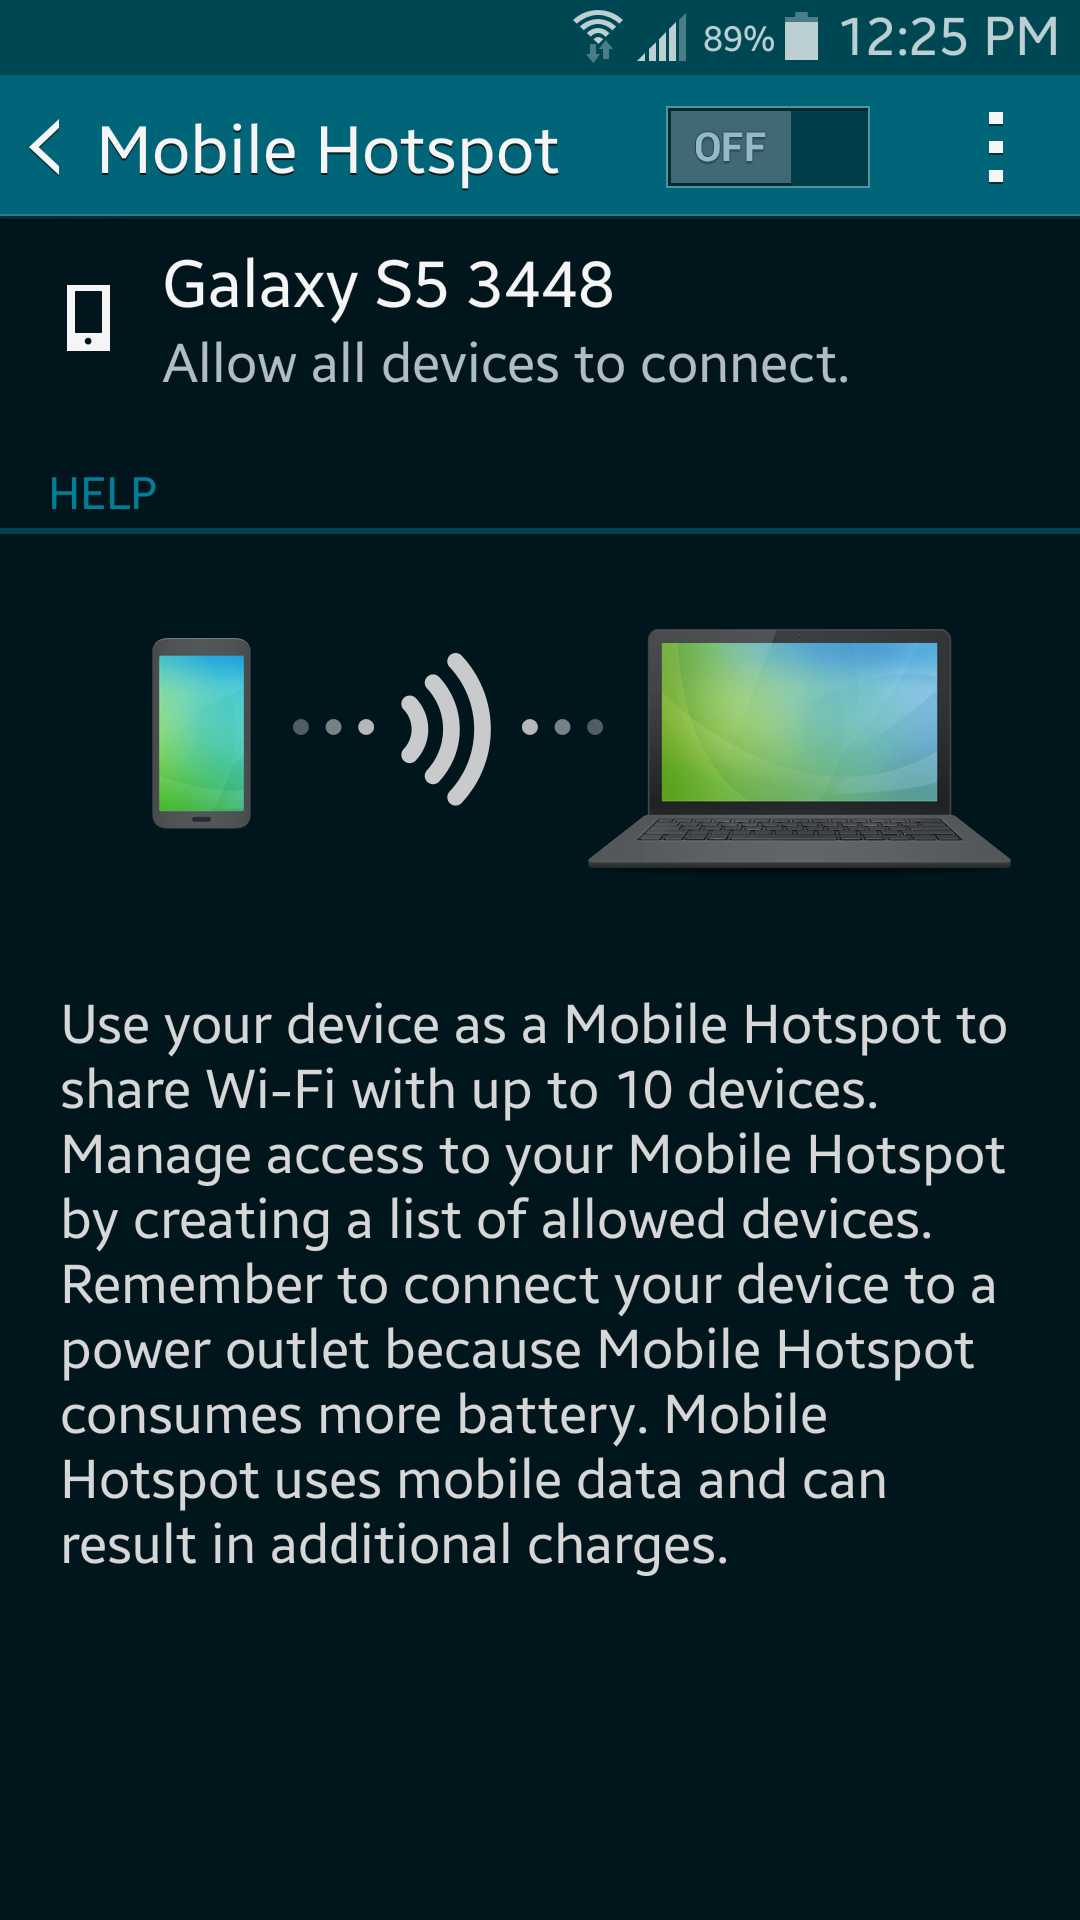 How To Use Your Cellular Phone As A Wi-Fi Hotspot | Online ...